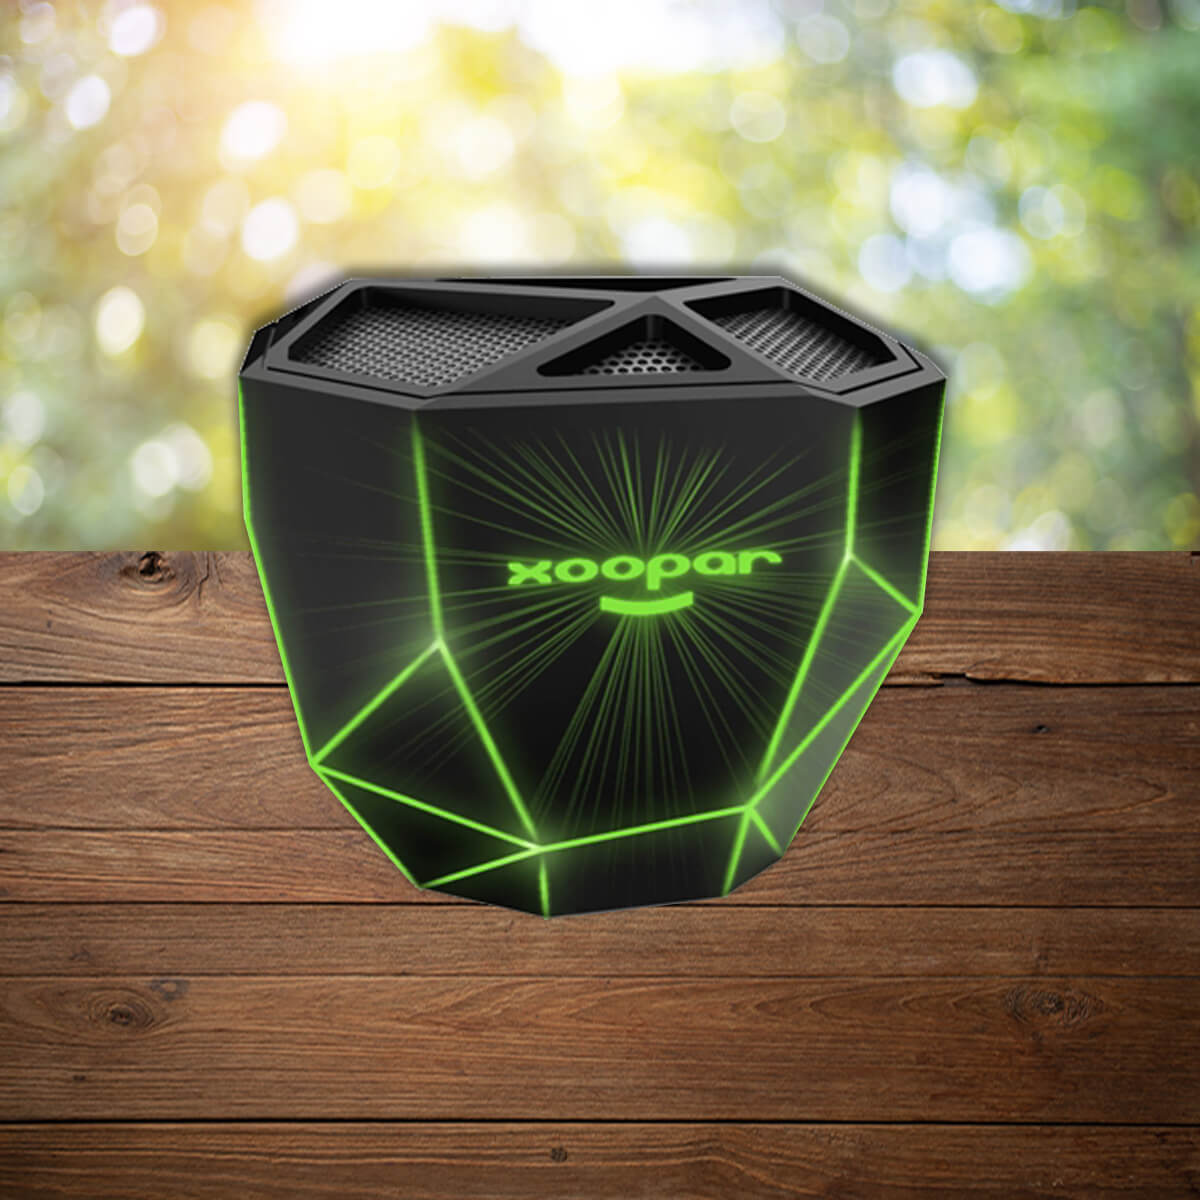 Octagonal logo'd green and black portable speaker promotional technology by curative printing